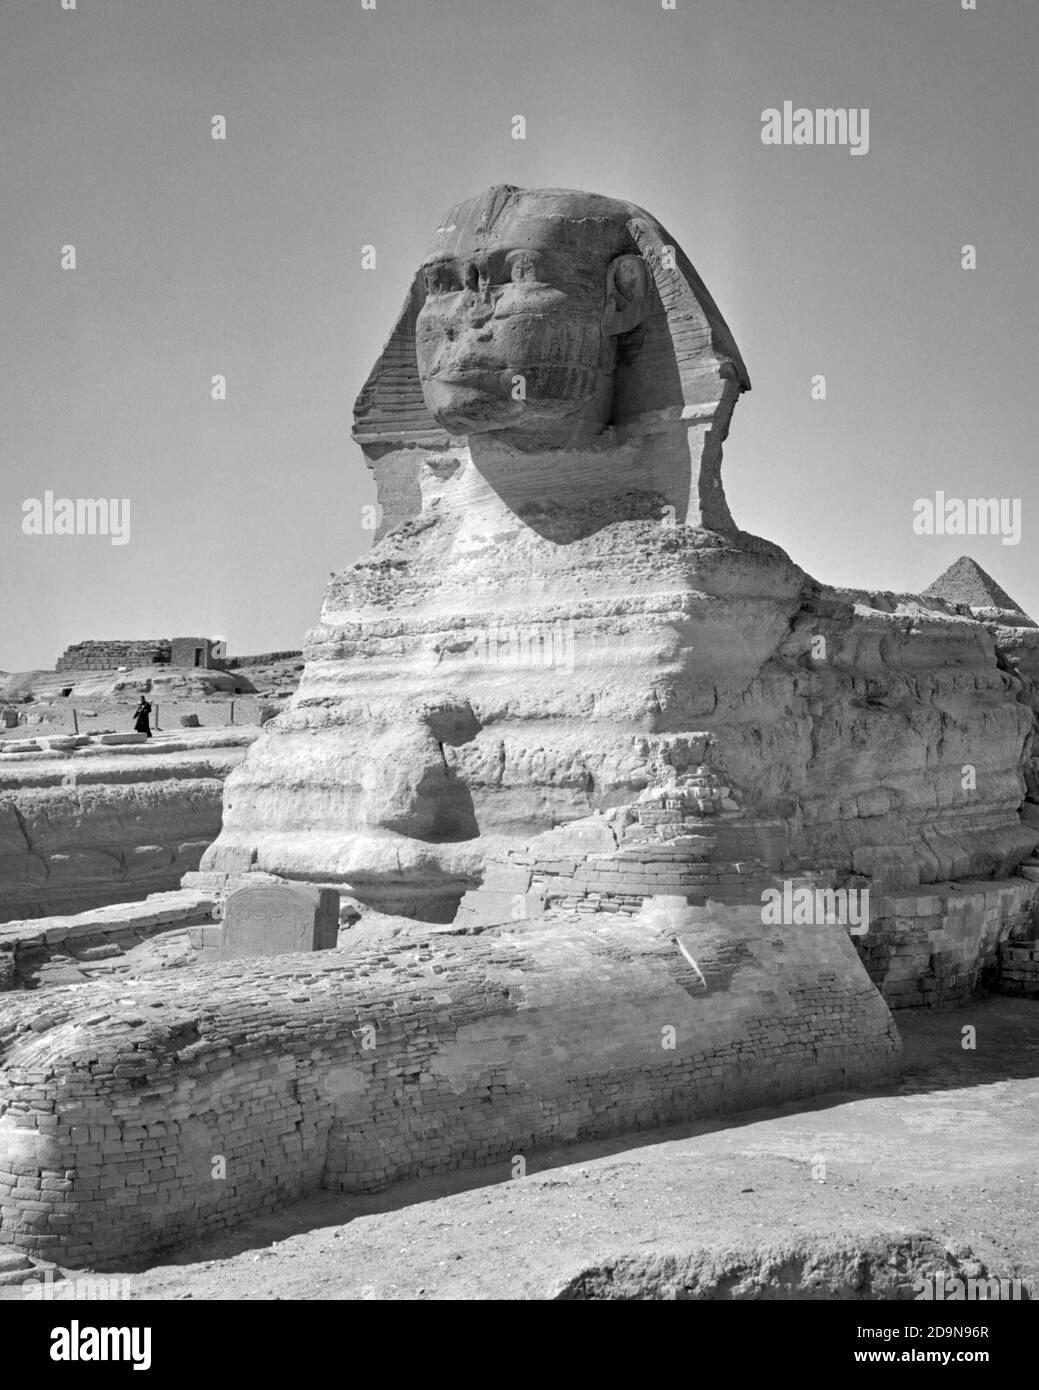 1960s THE GREAT SPHINX OF GIZA OUTSIDE OF CAIRO EGYPT LIMESTONE STATUE BUILT CIRCA 2500 BC BY PHARAOH KAFRE - r17478 RGE001 HARS PHARAOH BY OF THE CARVED MYTHICAL SILENT CONCEPTUAL HEADDRESS STYLISH HUMAN HEAD LION BODY MONOLITH 2500 BC BUILT CIRCA CREATURE LIMESTONE MYTHICAL CREATURE NORTHERN AFRICA OLD KINGDOM BCE BLACK AND WHITE MONUMENTAL OLD FASHIONED Stock Photo